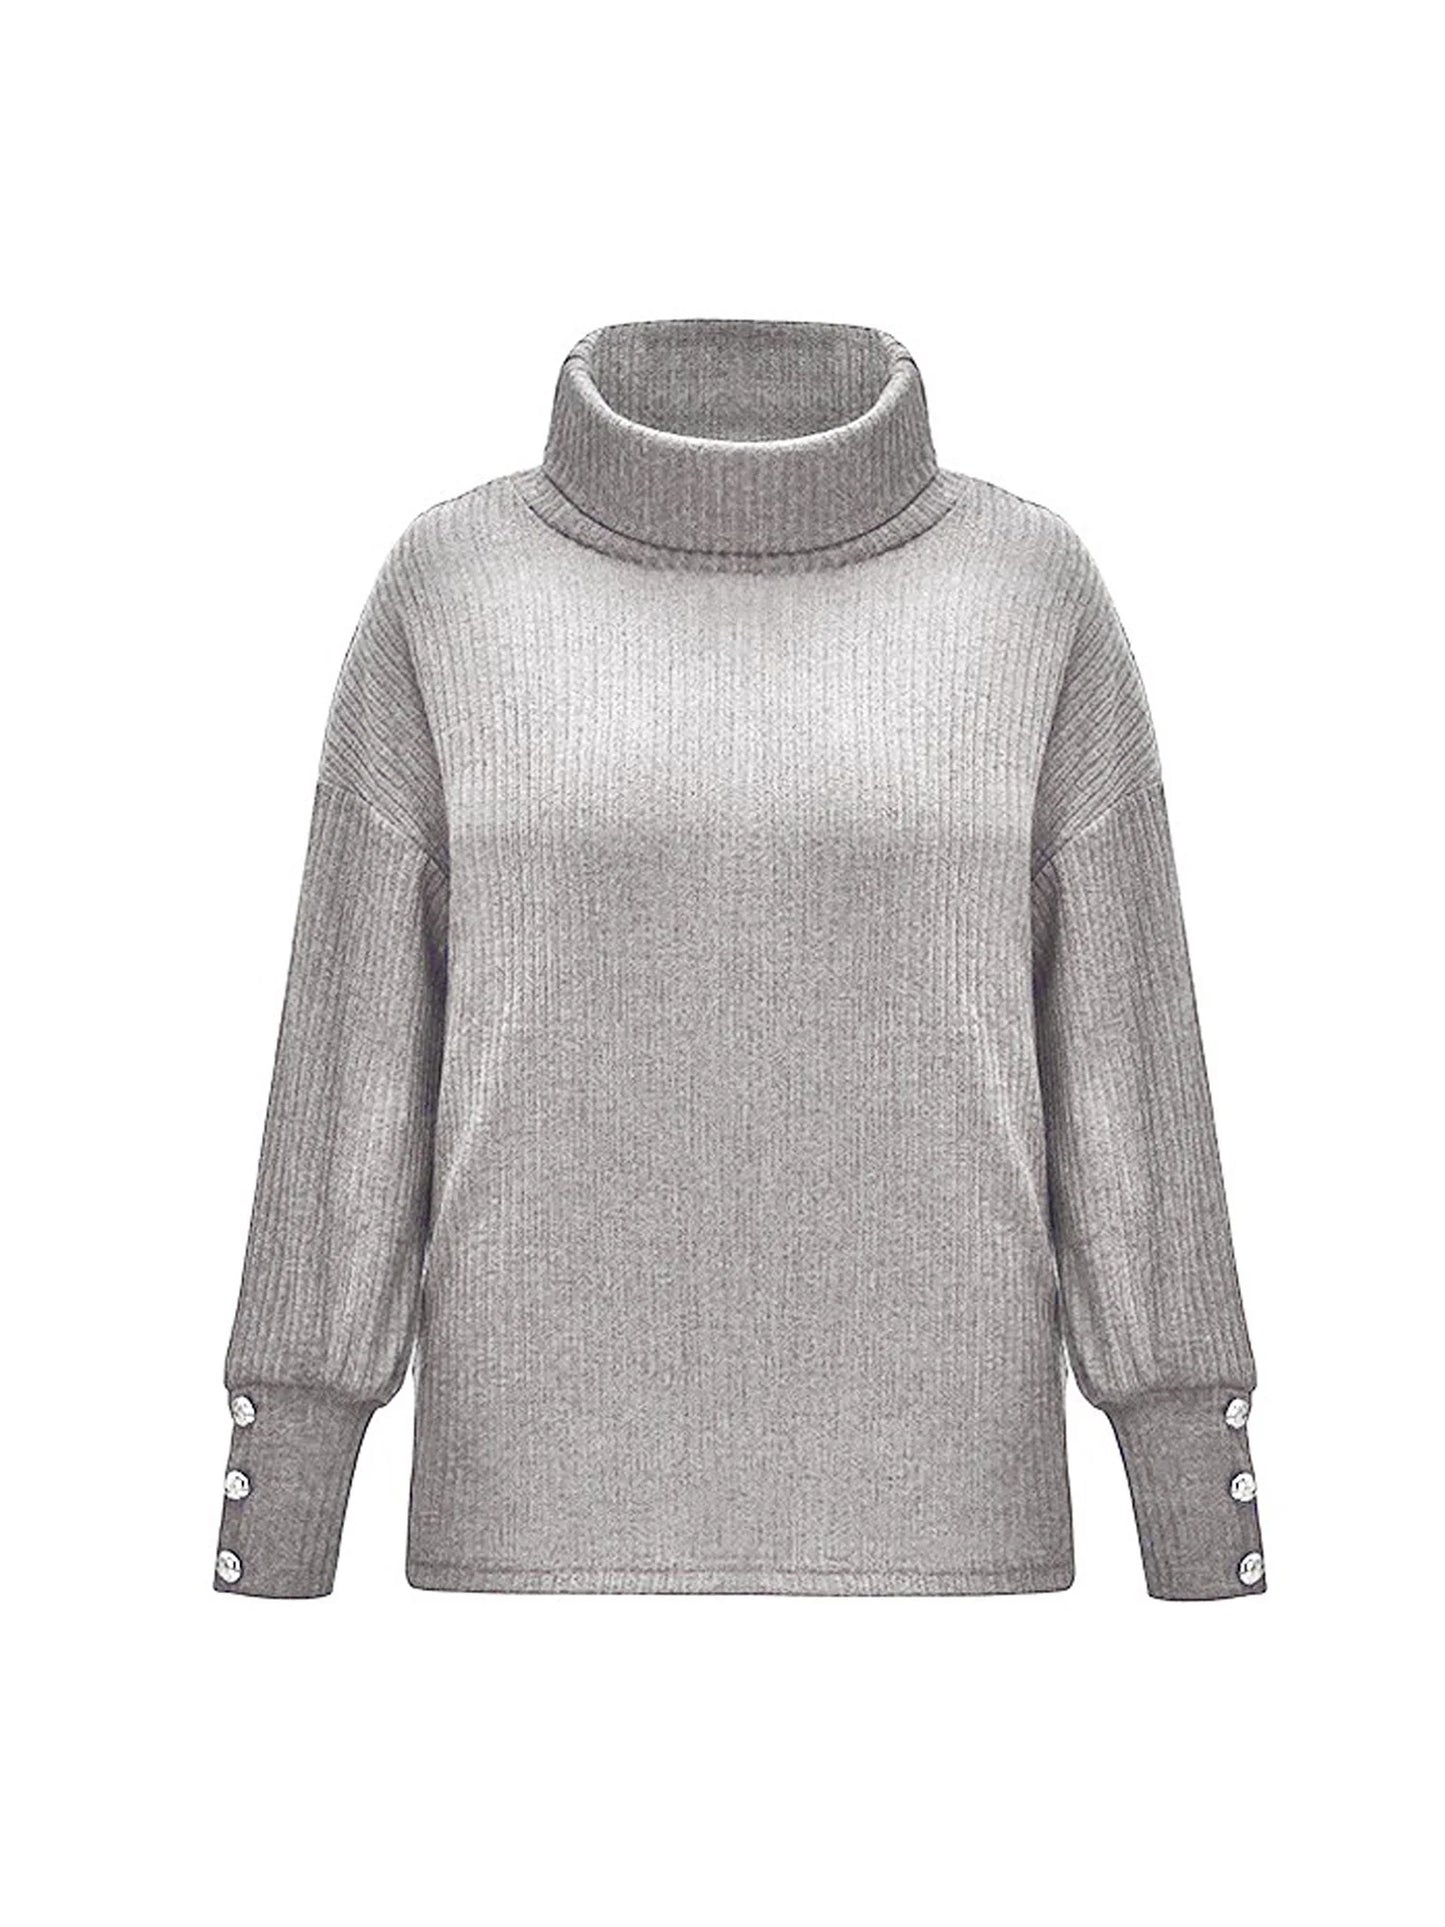 Women's FIGOHR Fashion Casual Long Sleeve Turtleneck Tops Autumn Winter Pullovers Knitted Ladies Loose Tops Knitted Sweater